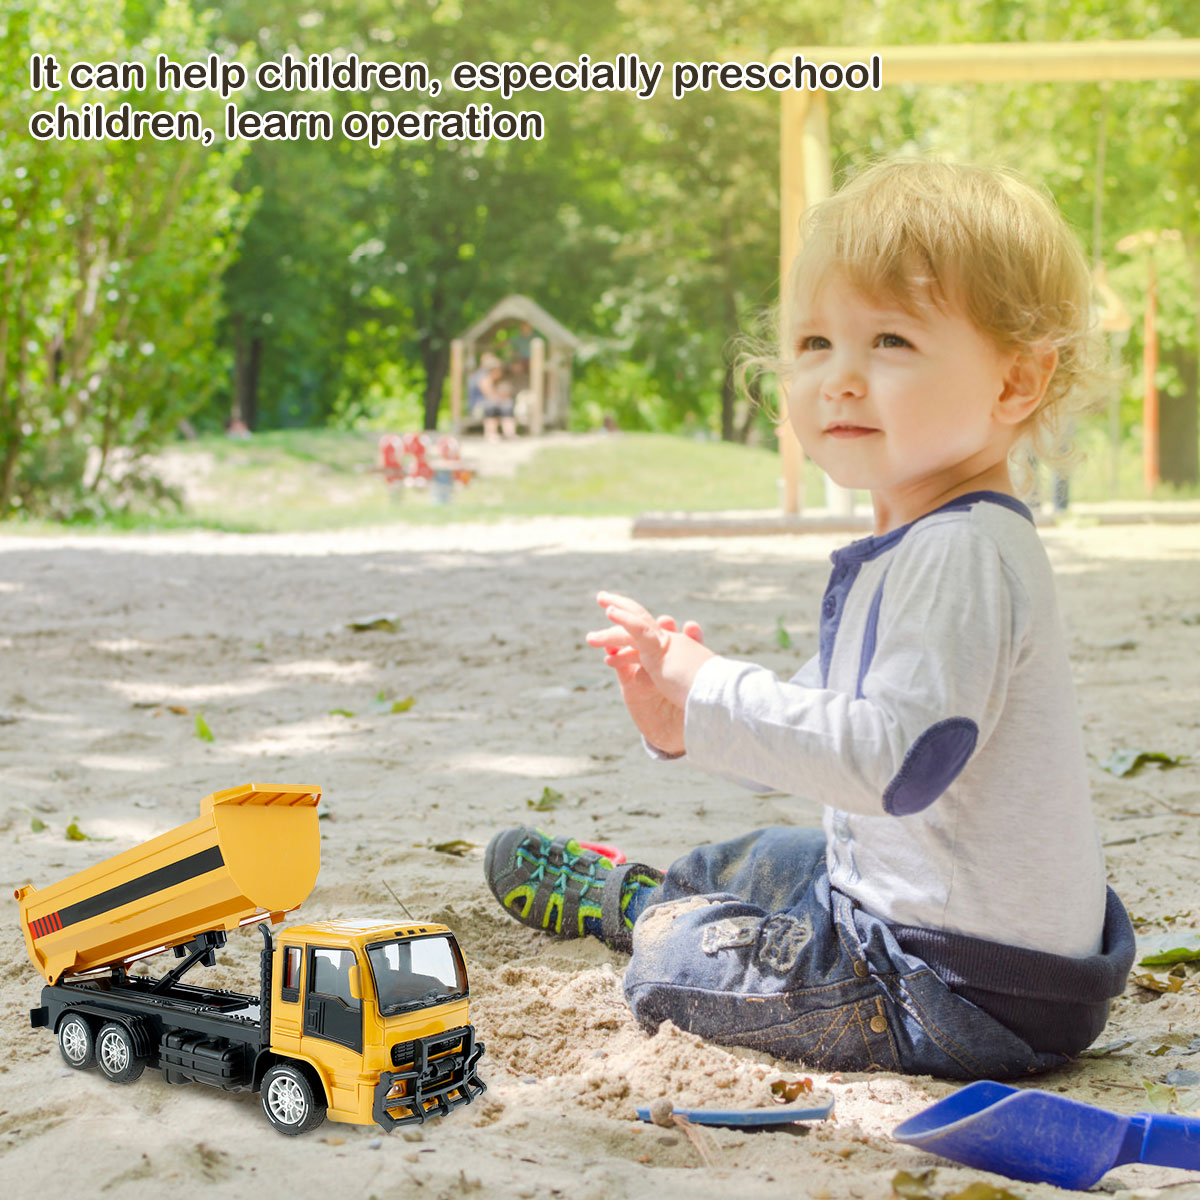 Remote Control Excavator Truck RC Construction Toys RC Dump Truck Digger Construction Vehicle Toy with LED Lights USB Electric RC Remote Control Construction Tractor Gifts for Kids - image 5 of 7